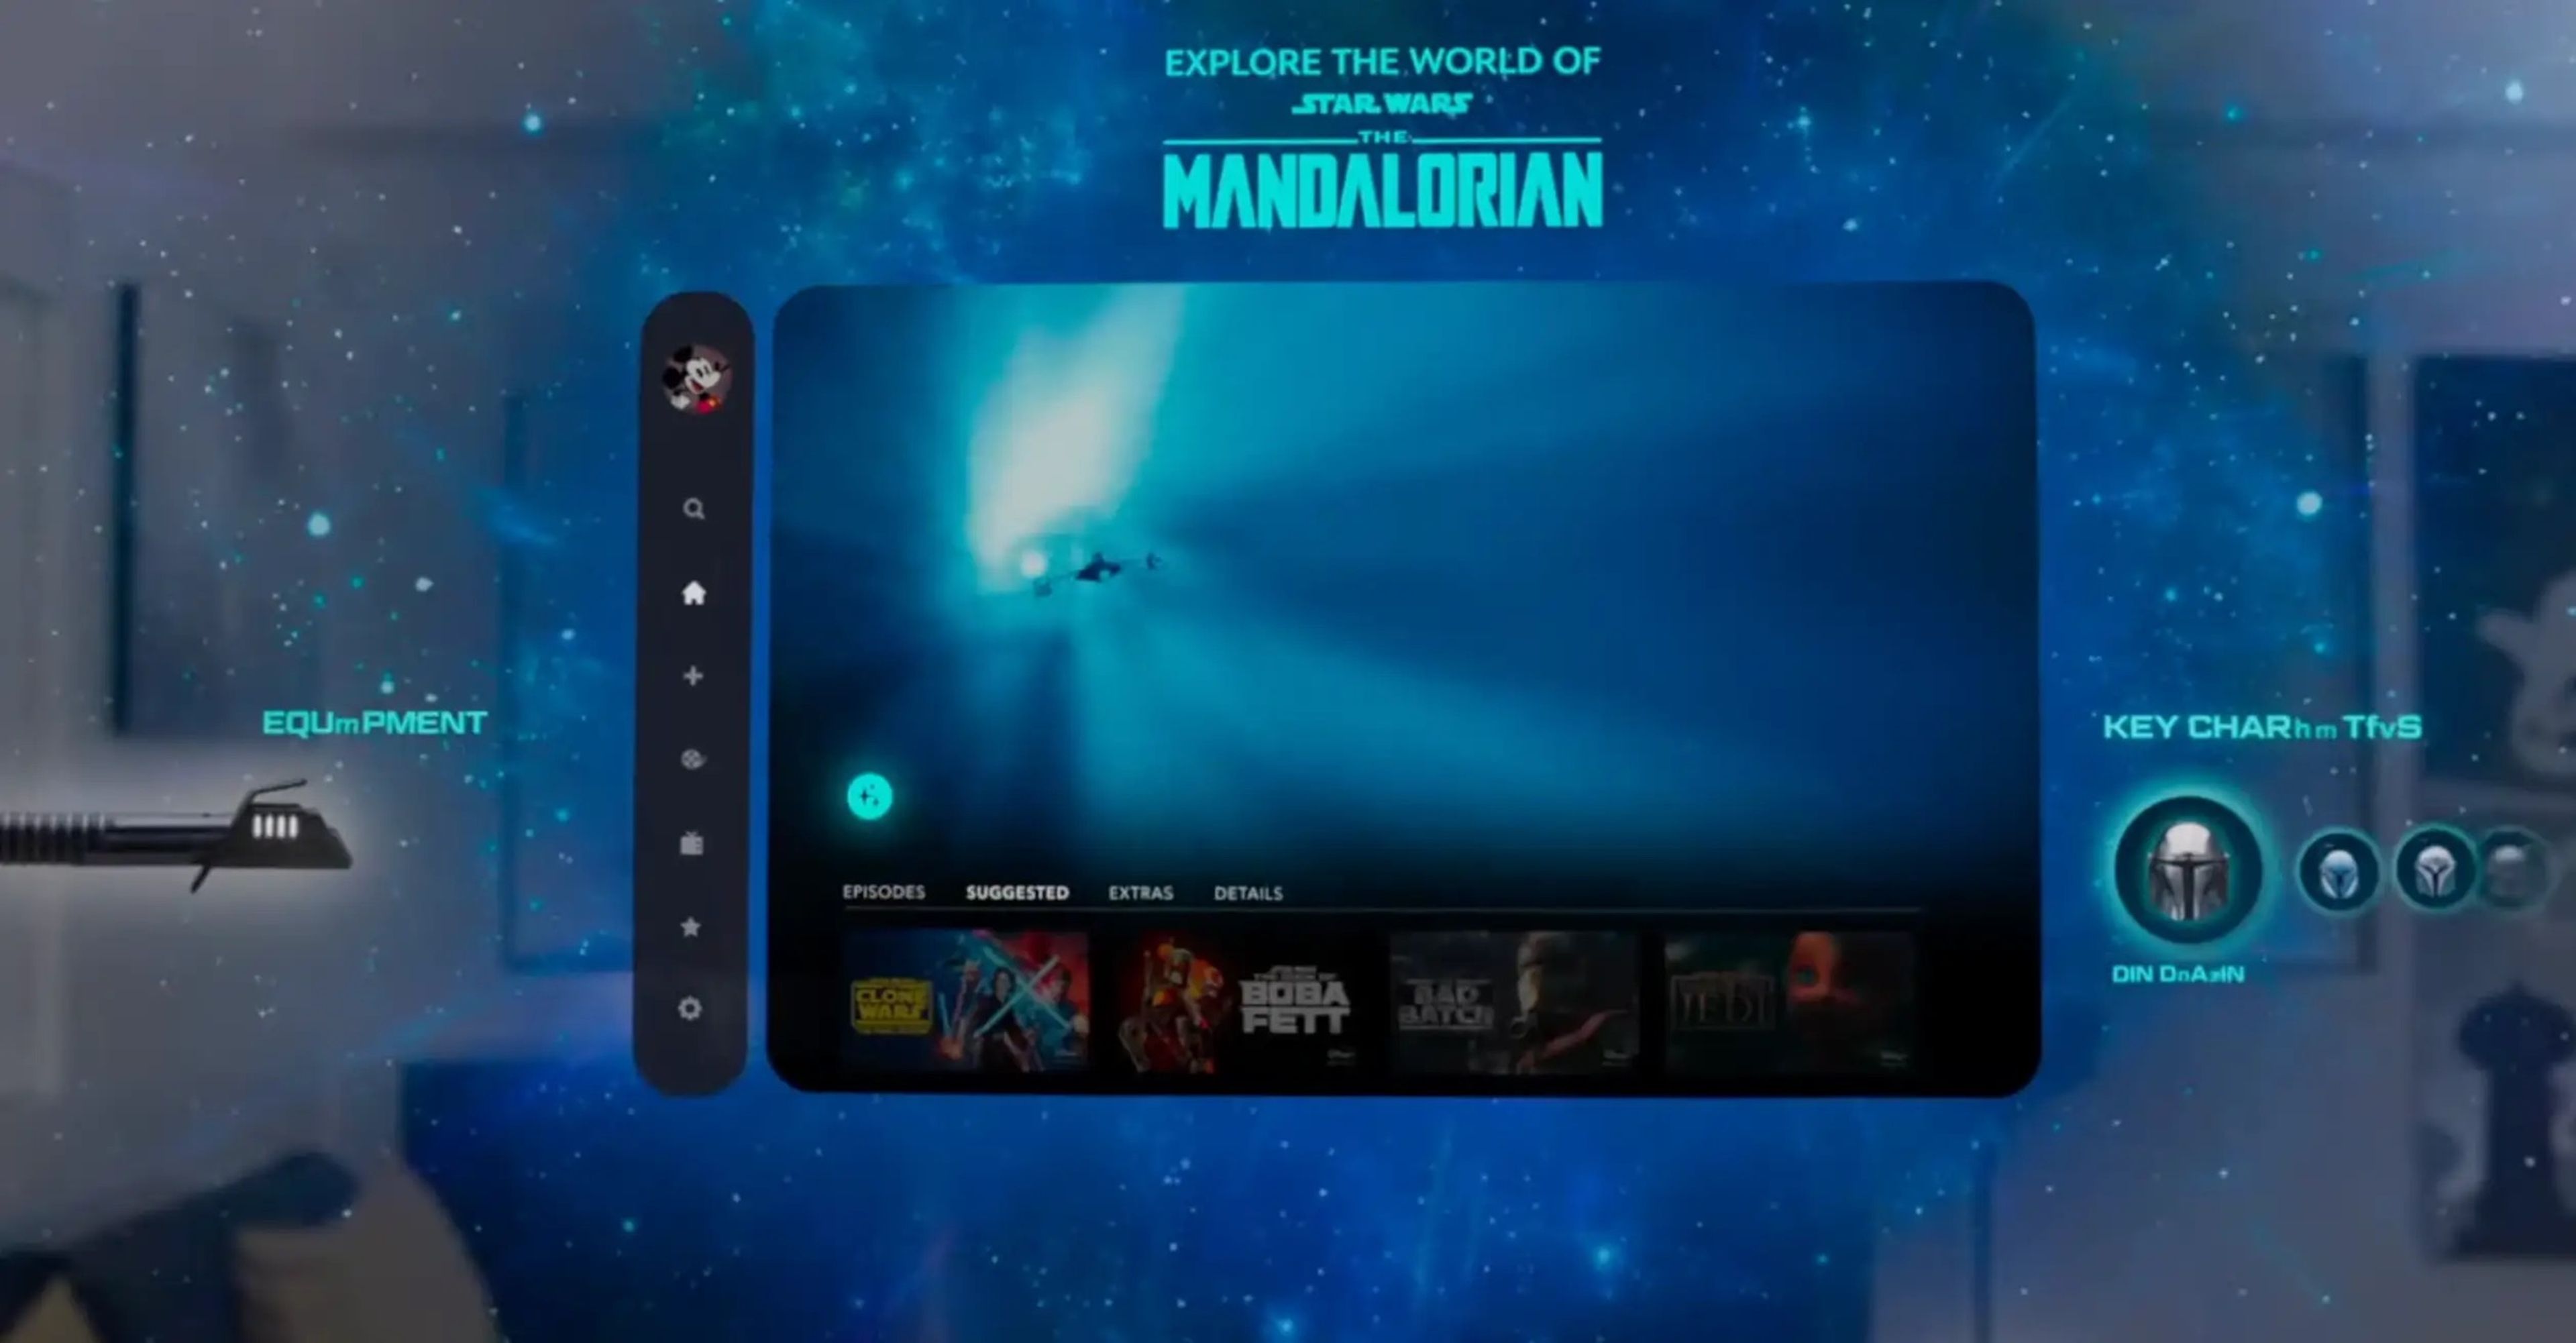 Mandalorian footage shown in space environment